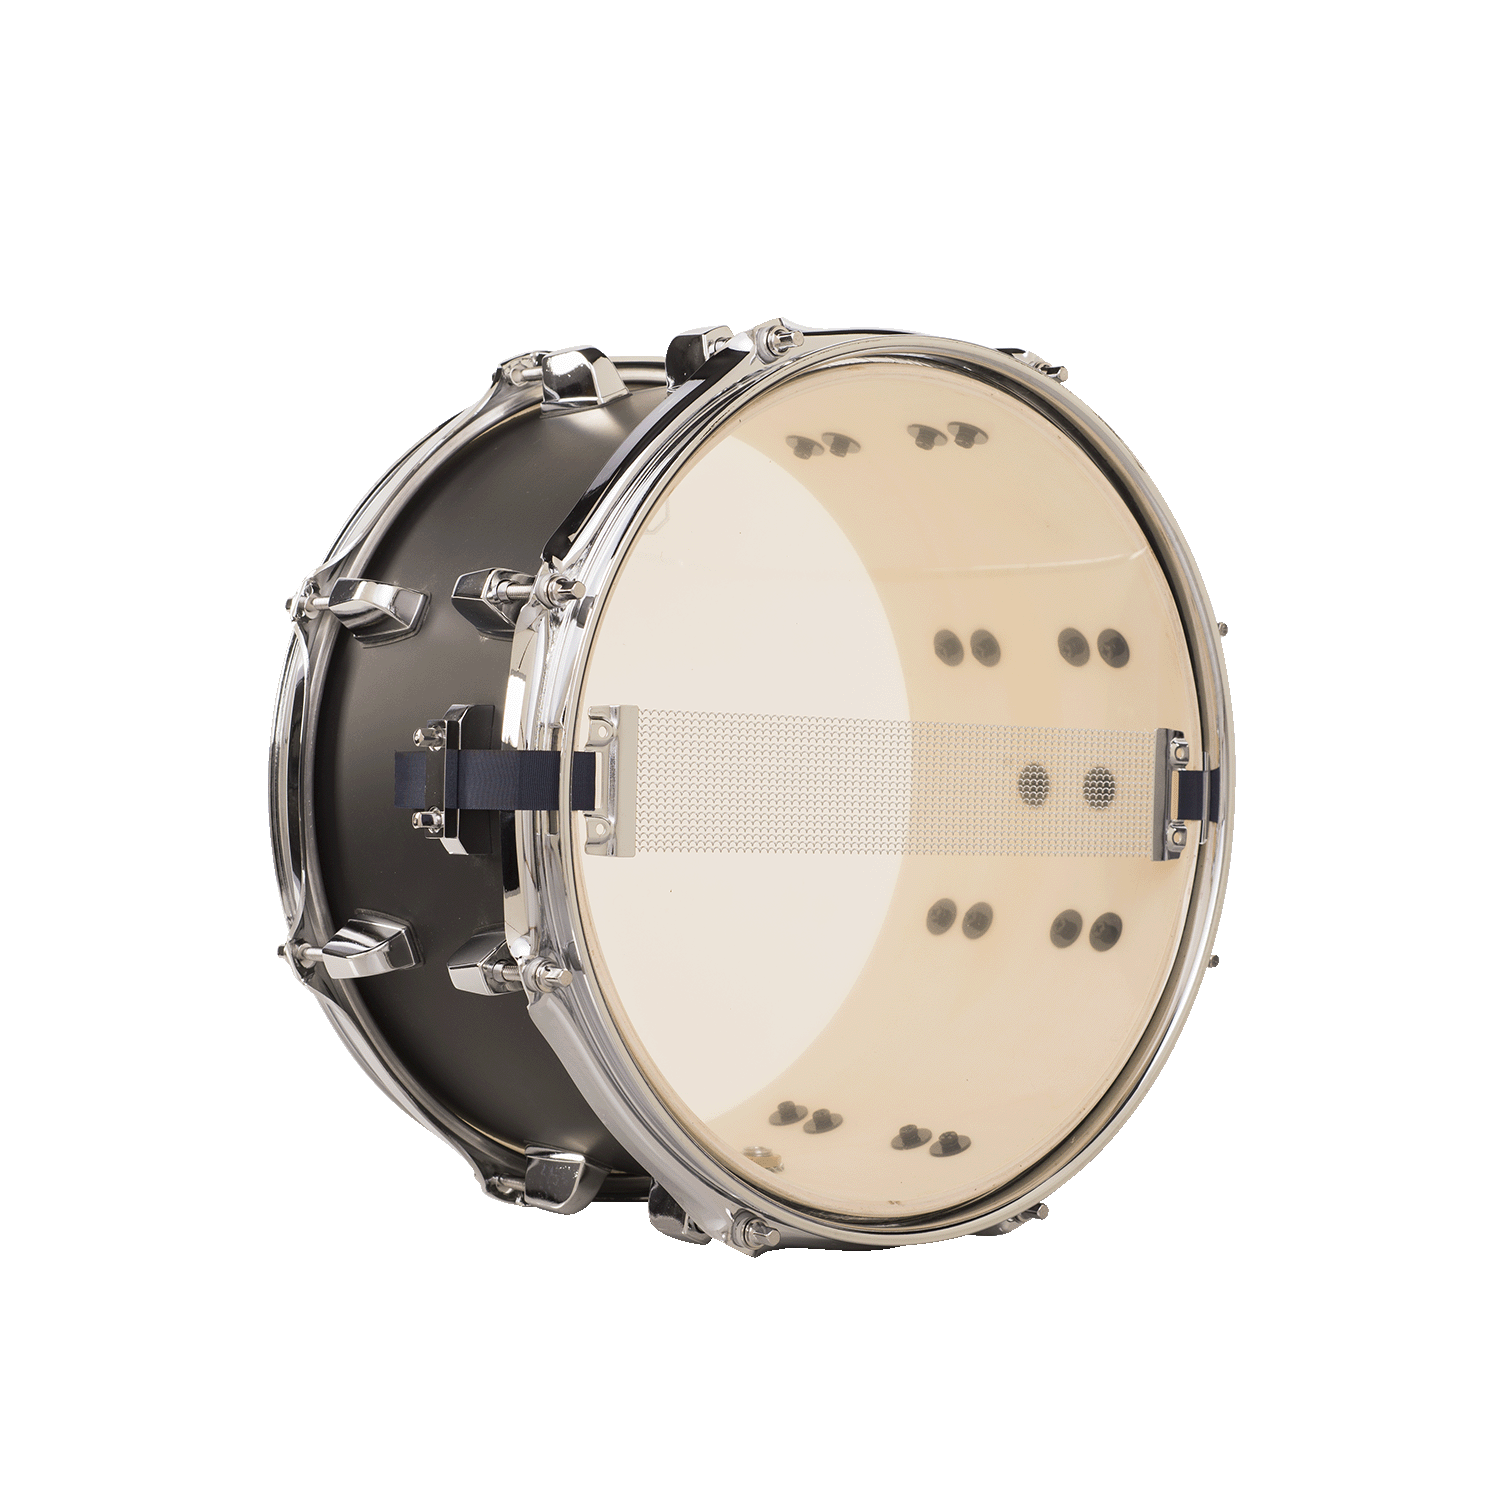 SNARE  MICHAEL POWERGATE STAGE PGS1255 JBK 12x5,5